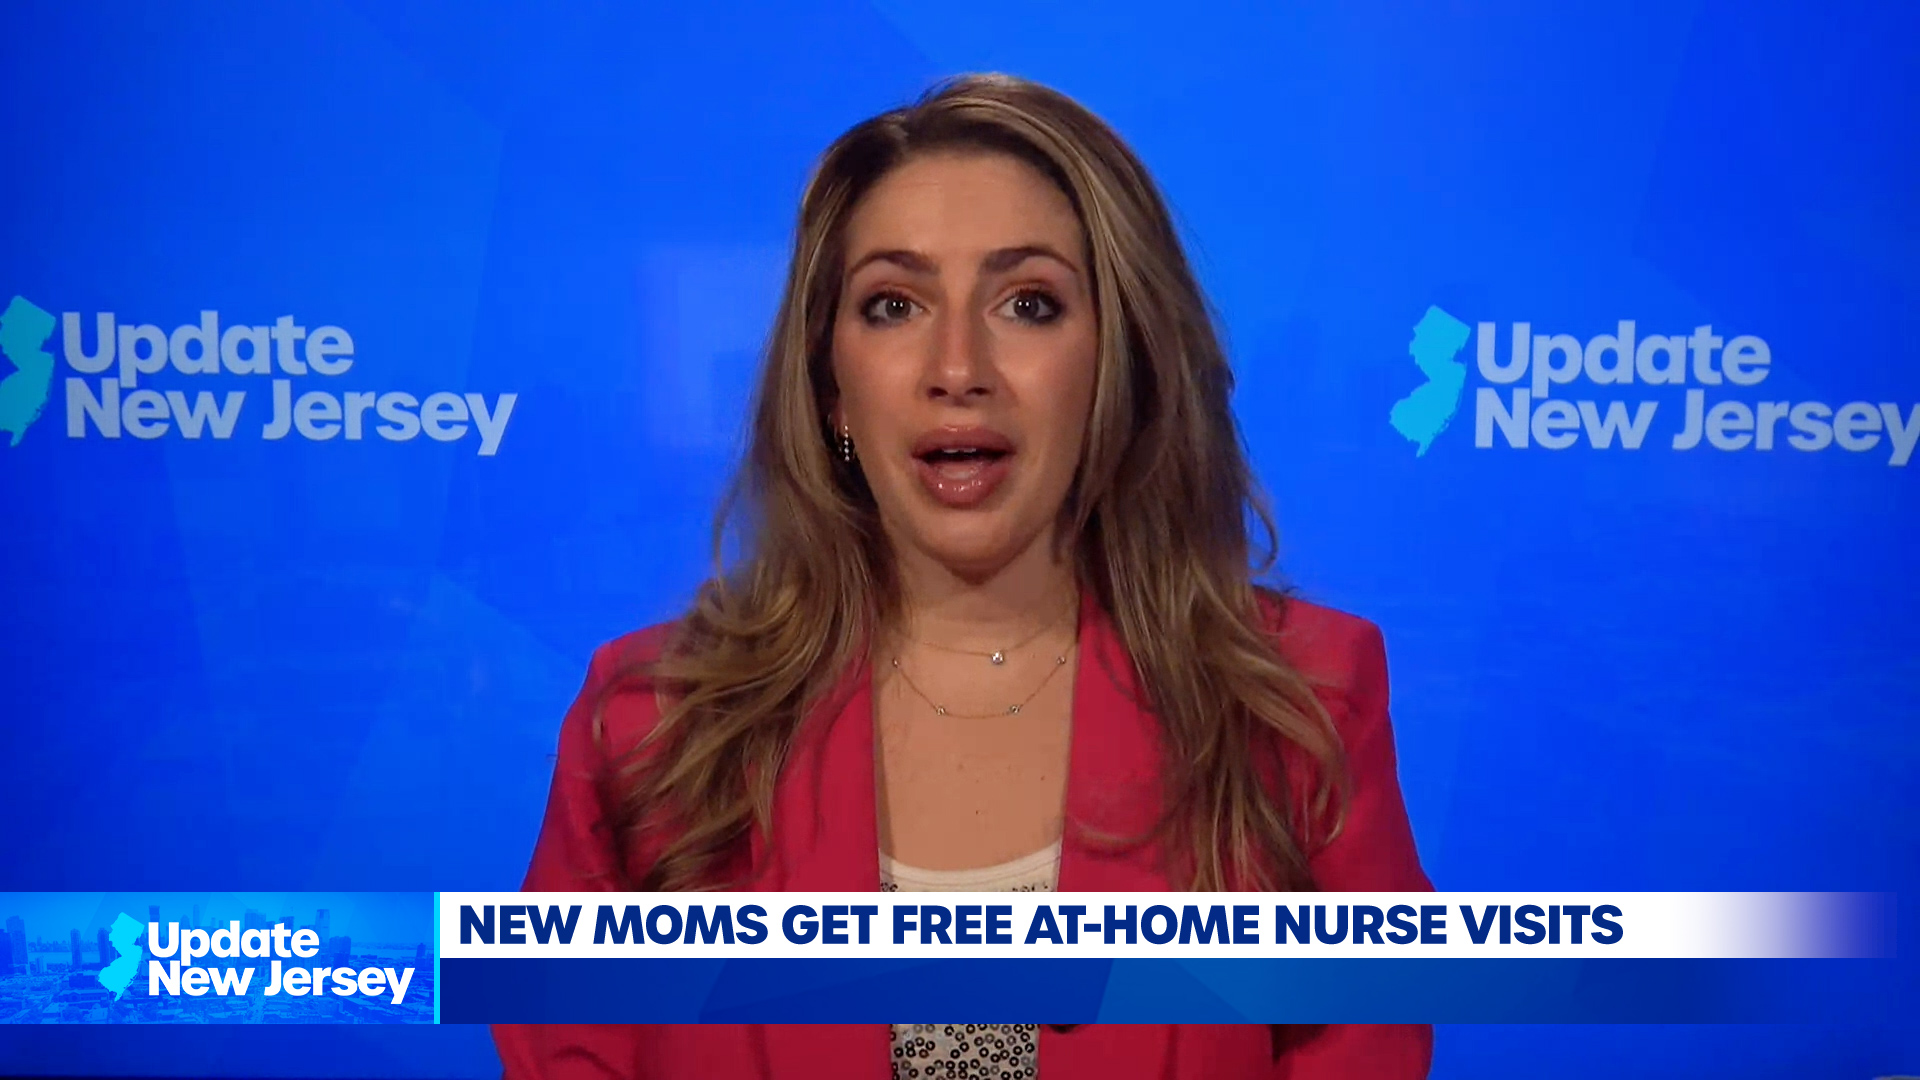 News Update: Free At-Home Visits for New Moms